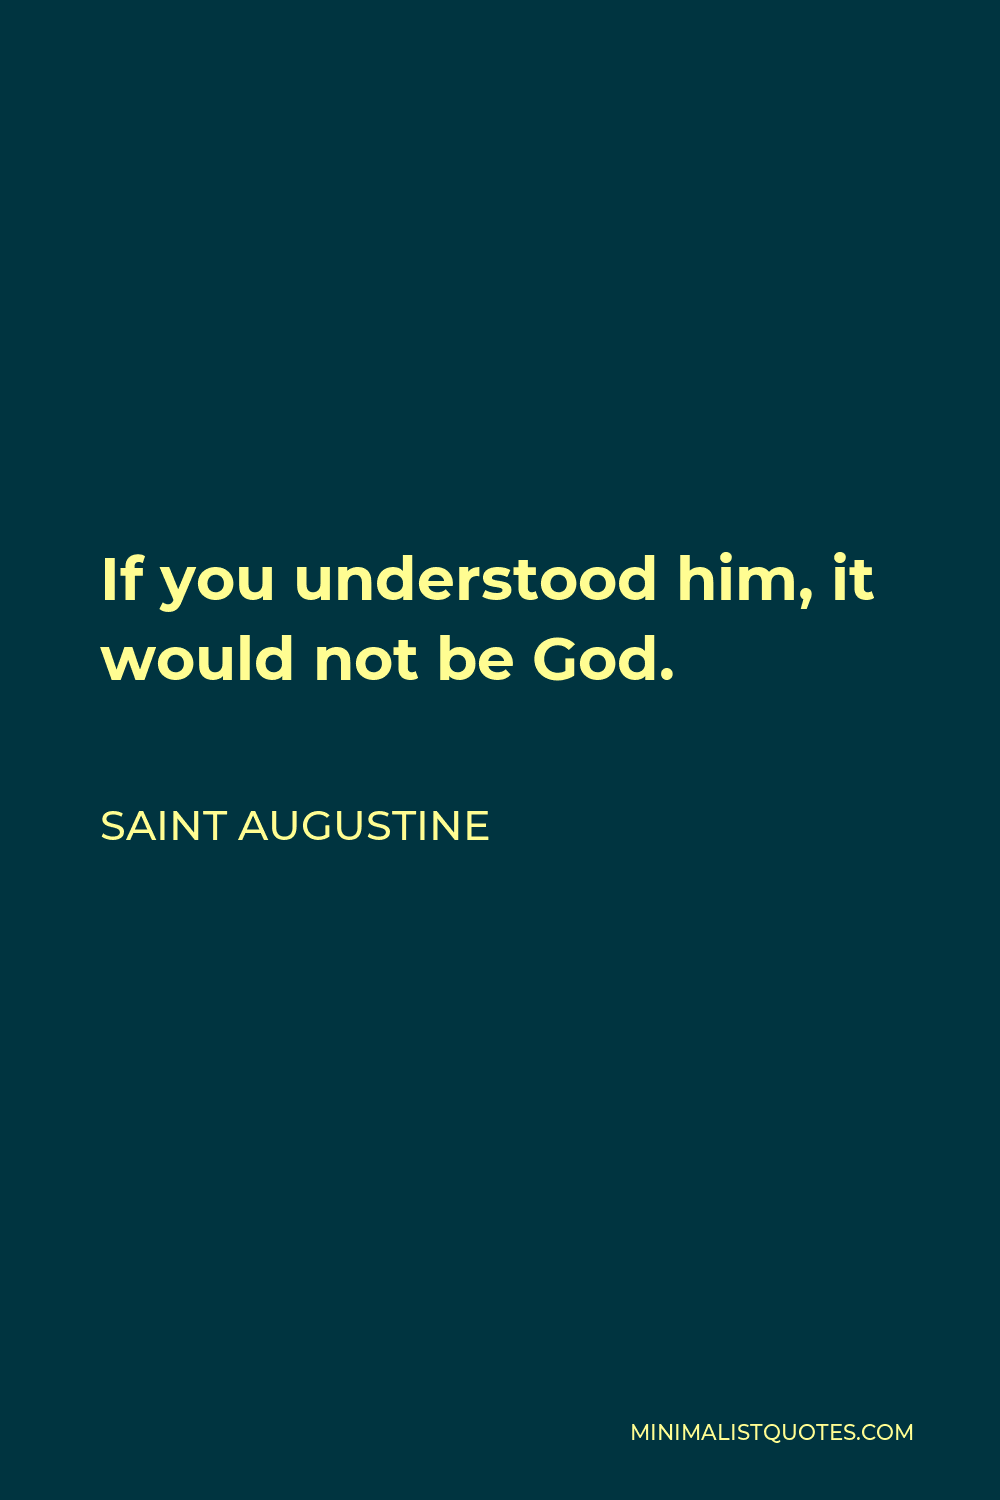 Saint Augustine Quote - If you understood him, it would not be God.